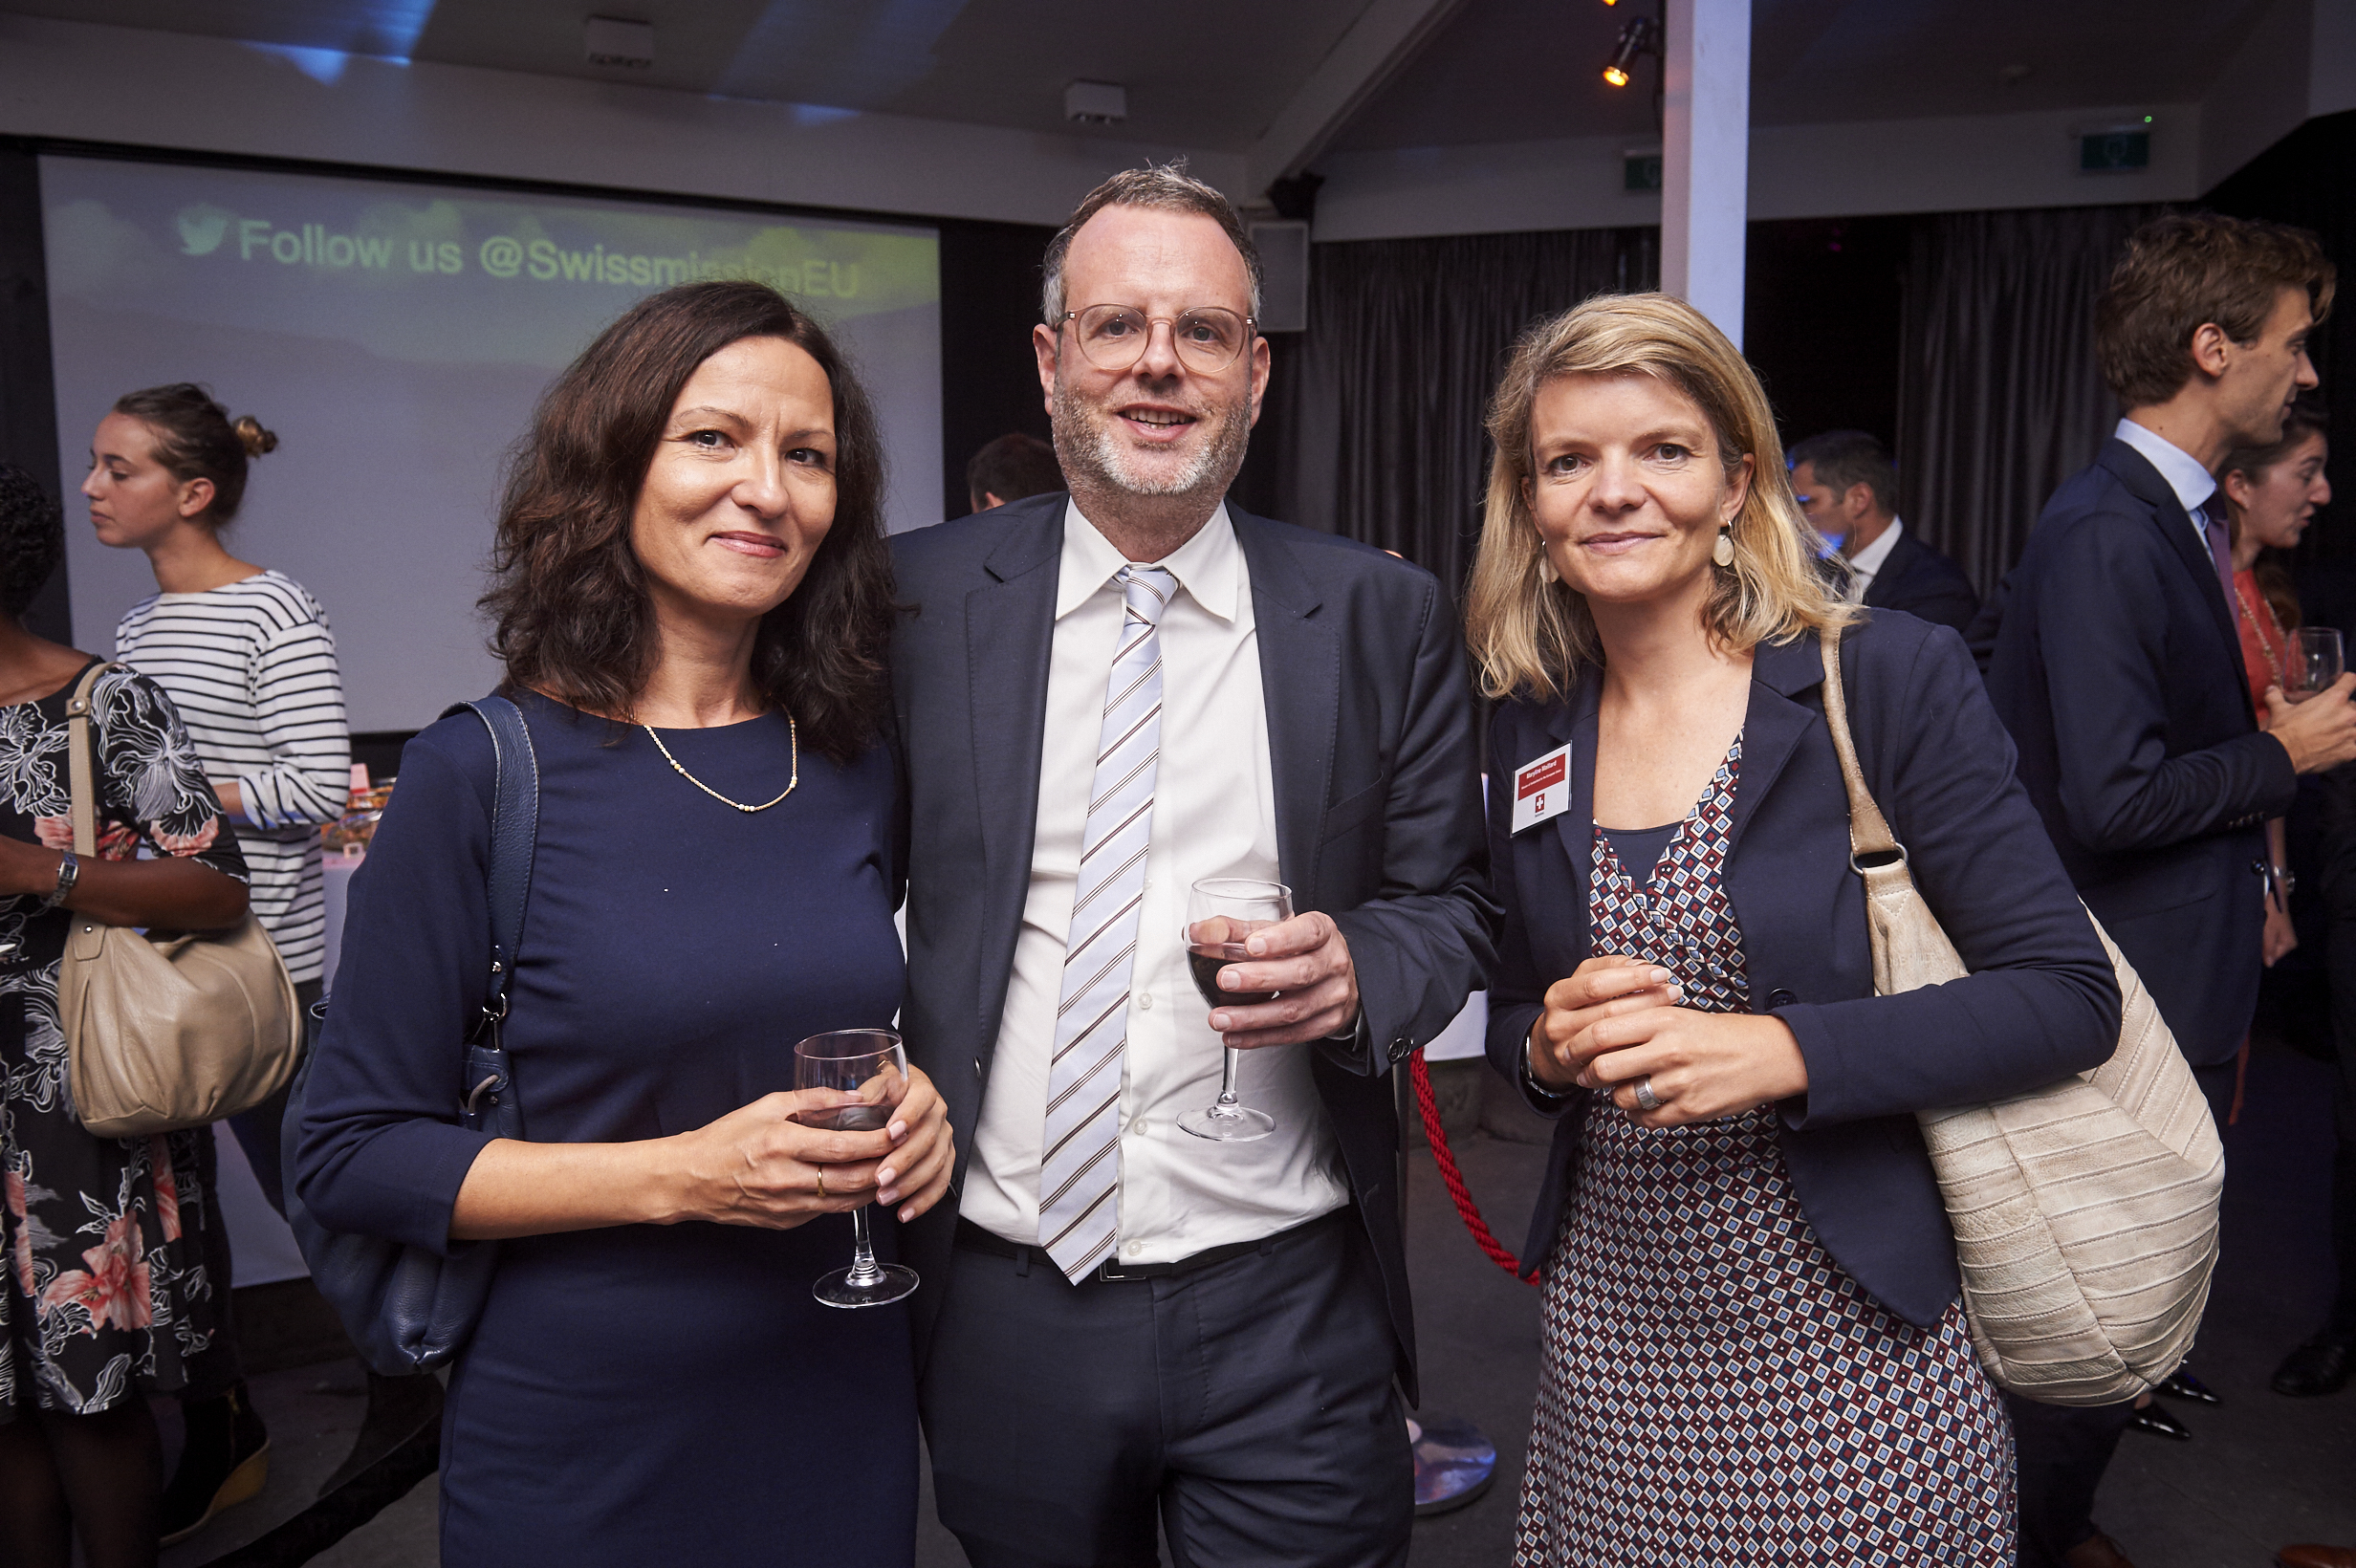 Mr Peter Stuckmann and his wife, DG Connect, European Commission, and Ms Maryline Maillard, Counsellor of the Swiss Mission to the EU